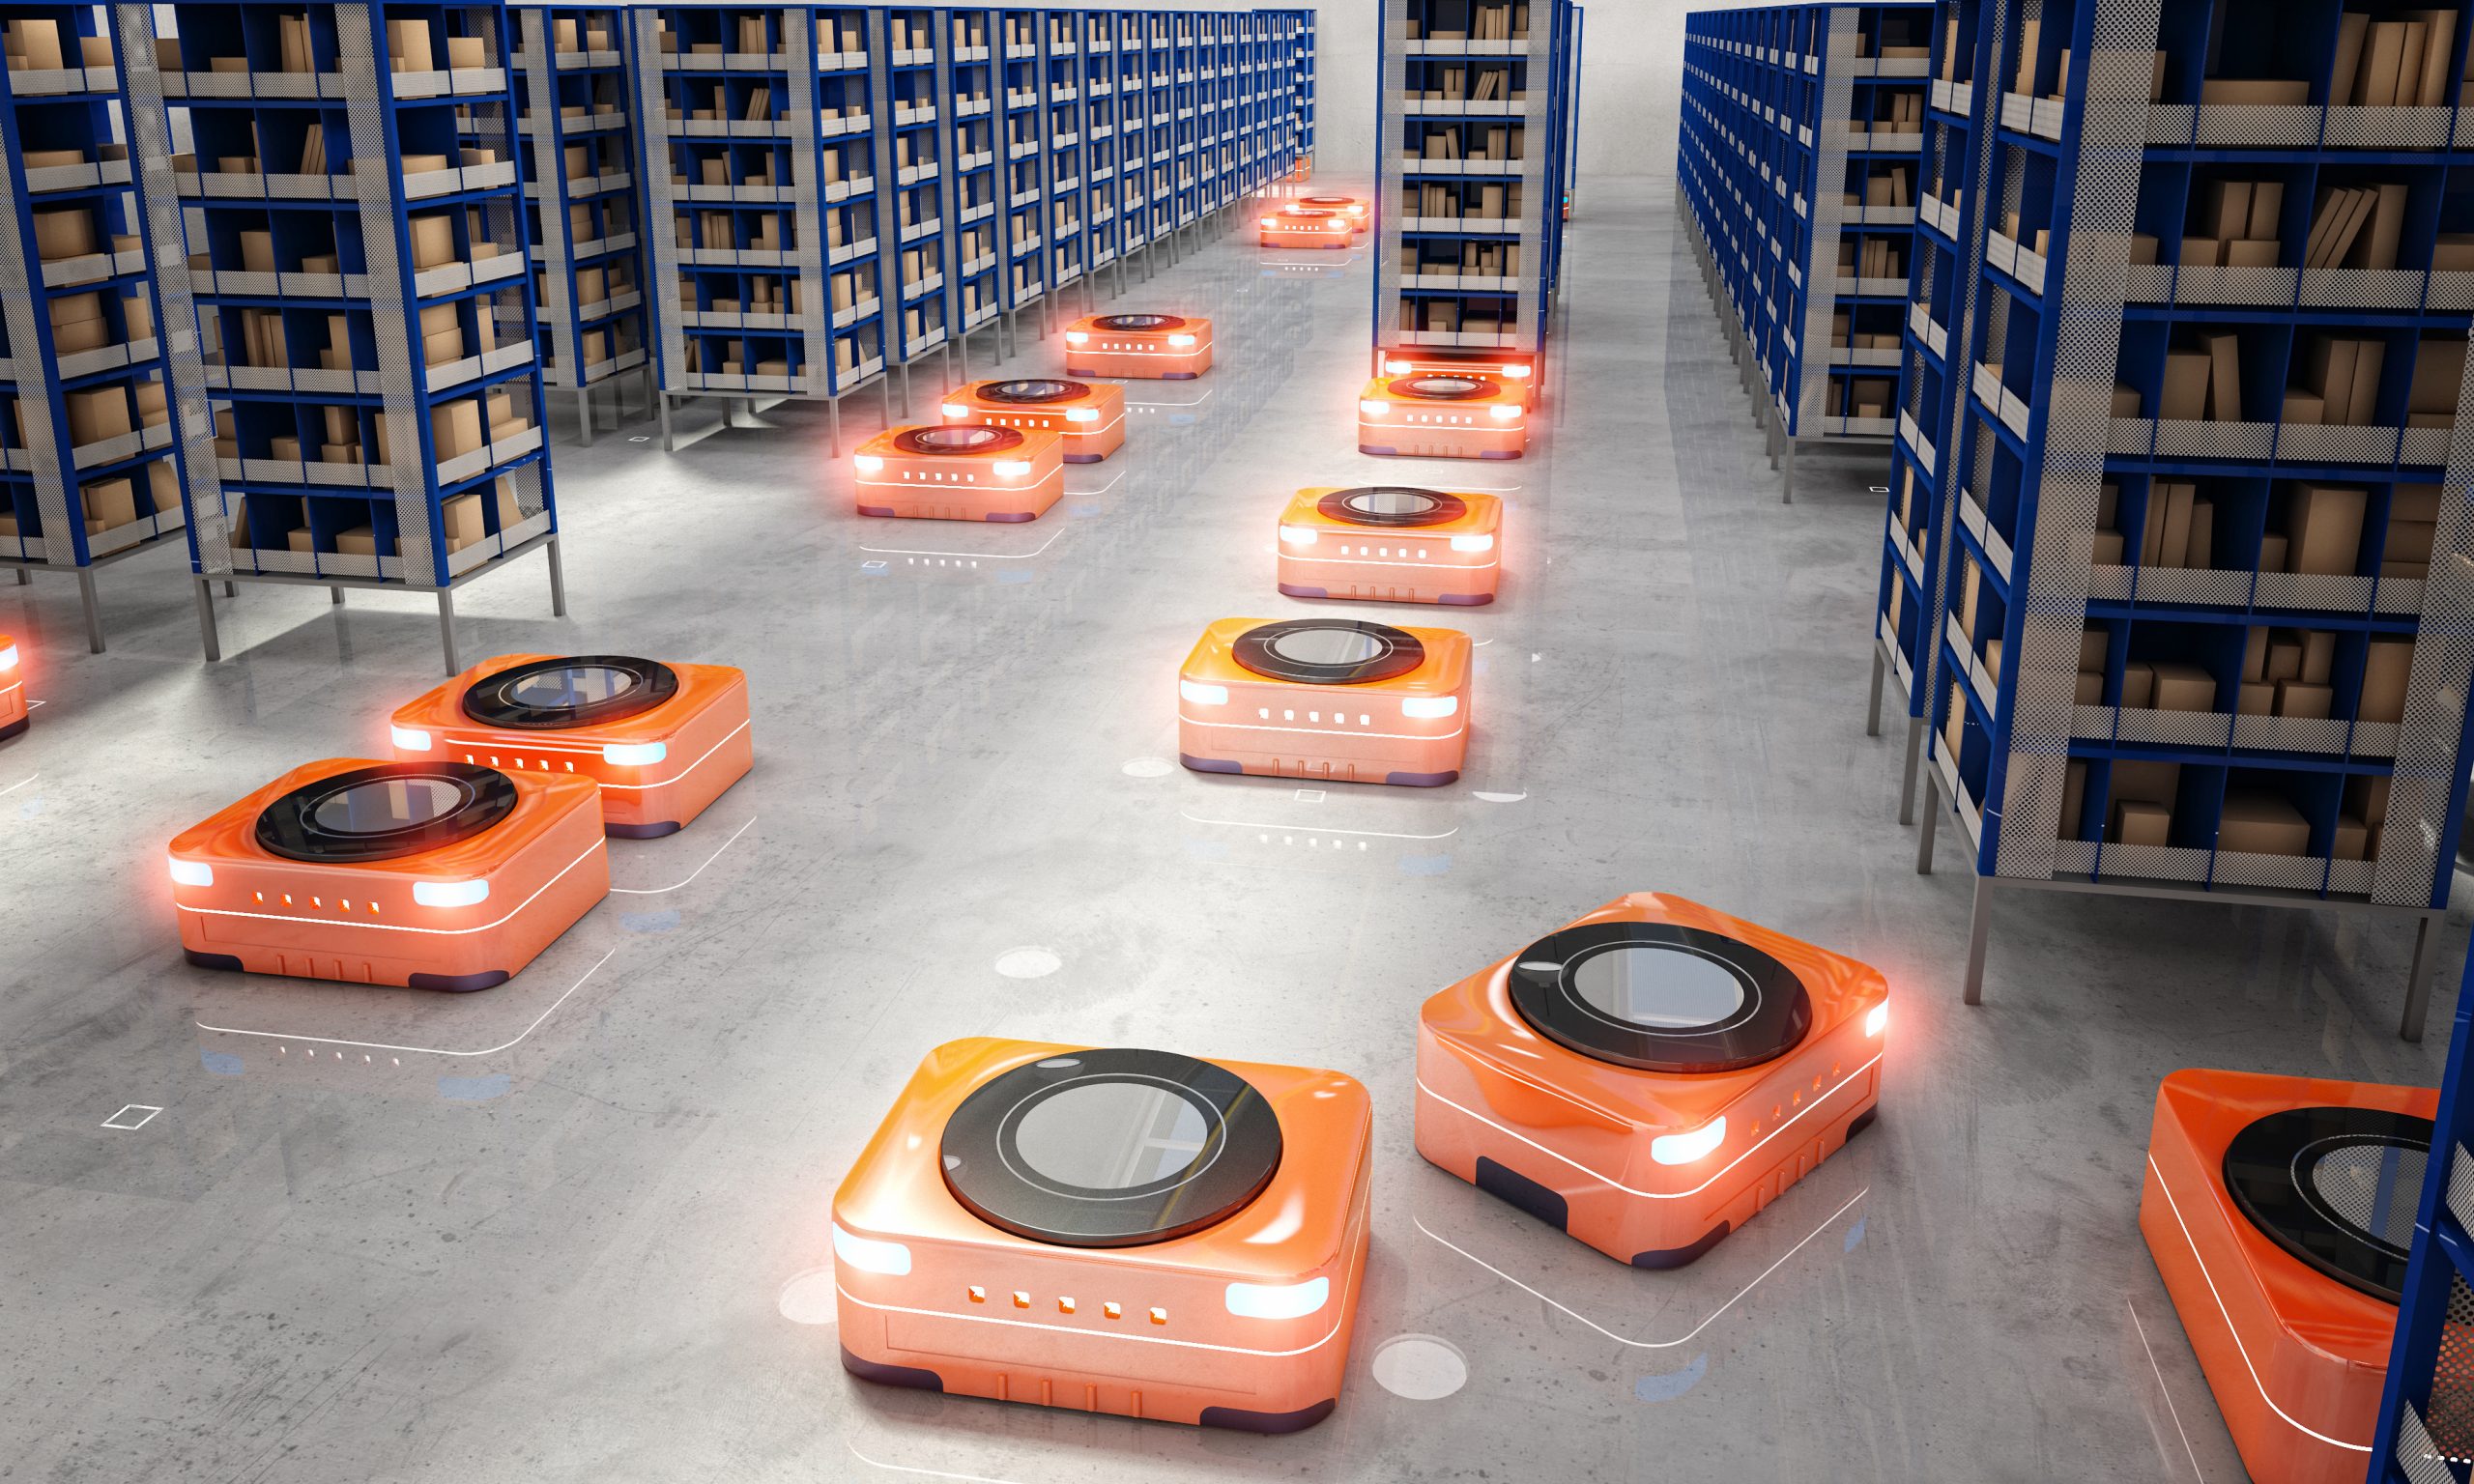 Warehouse Robots Clocking in for their Shift